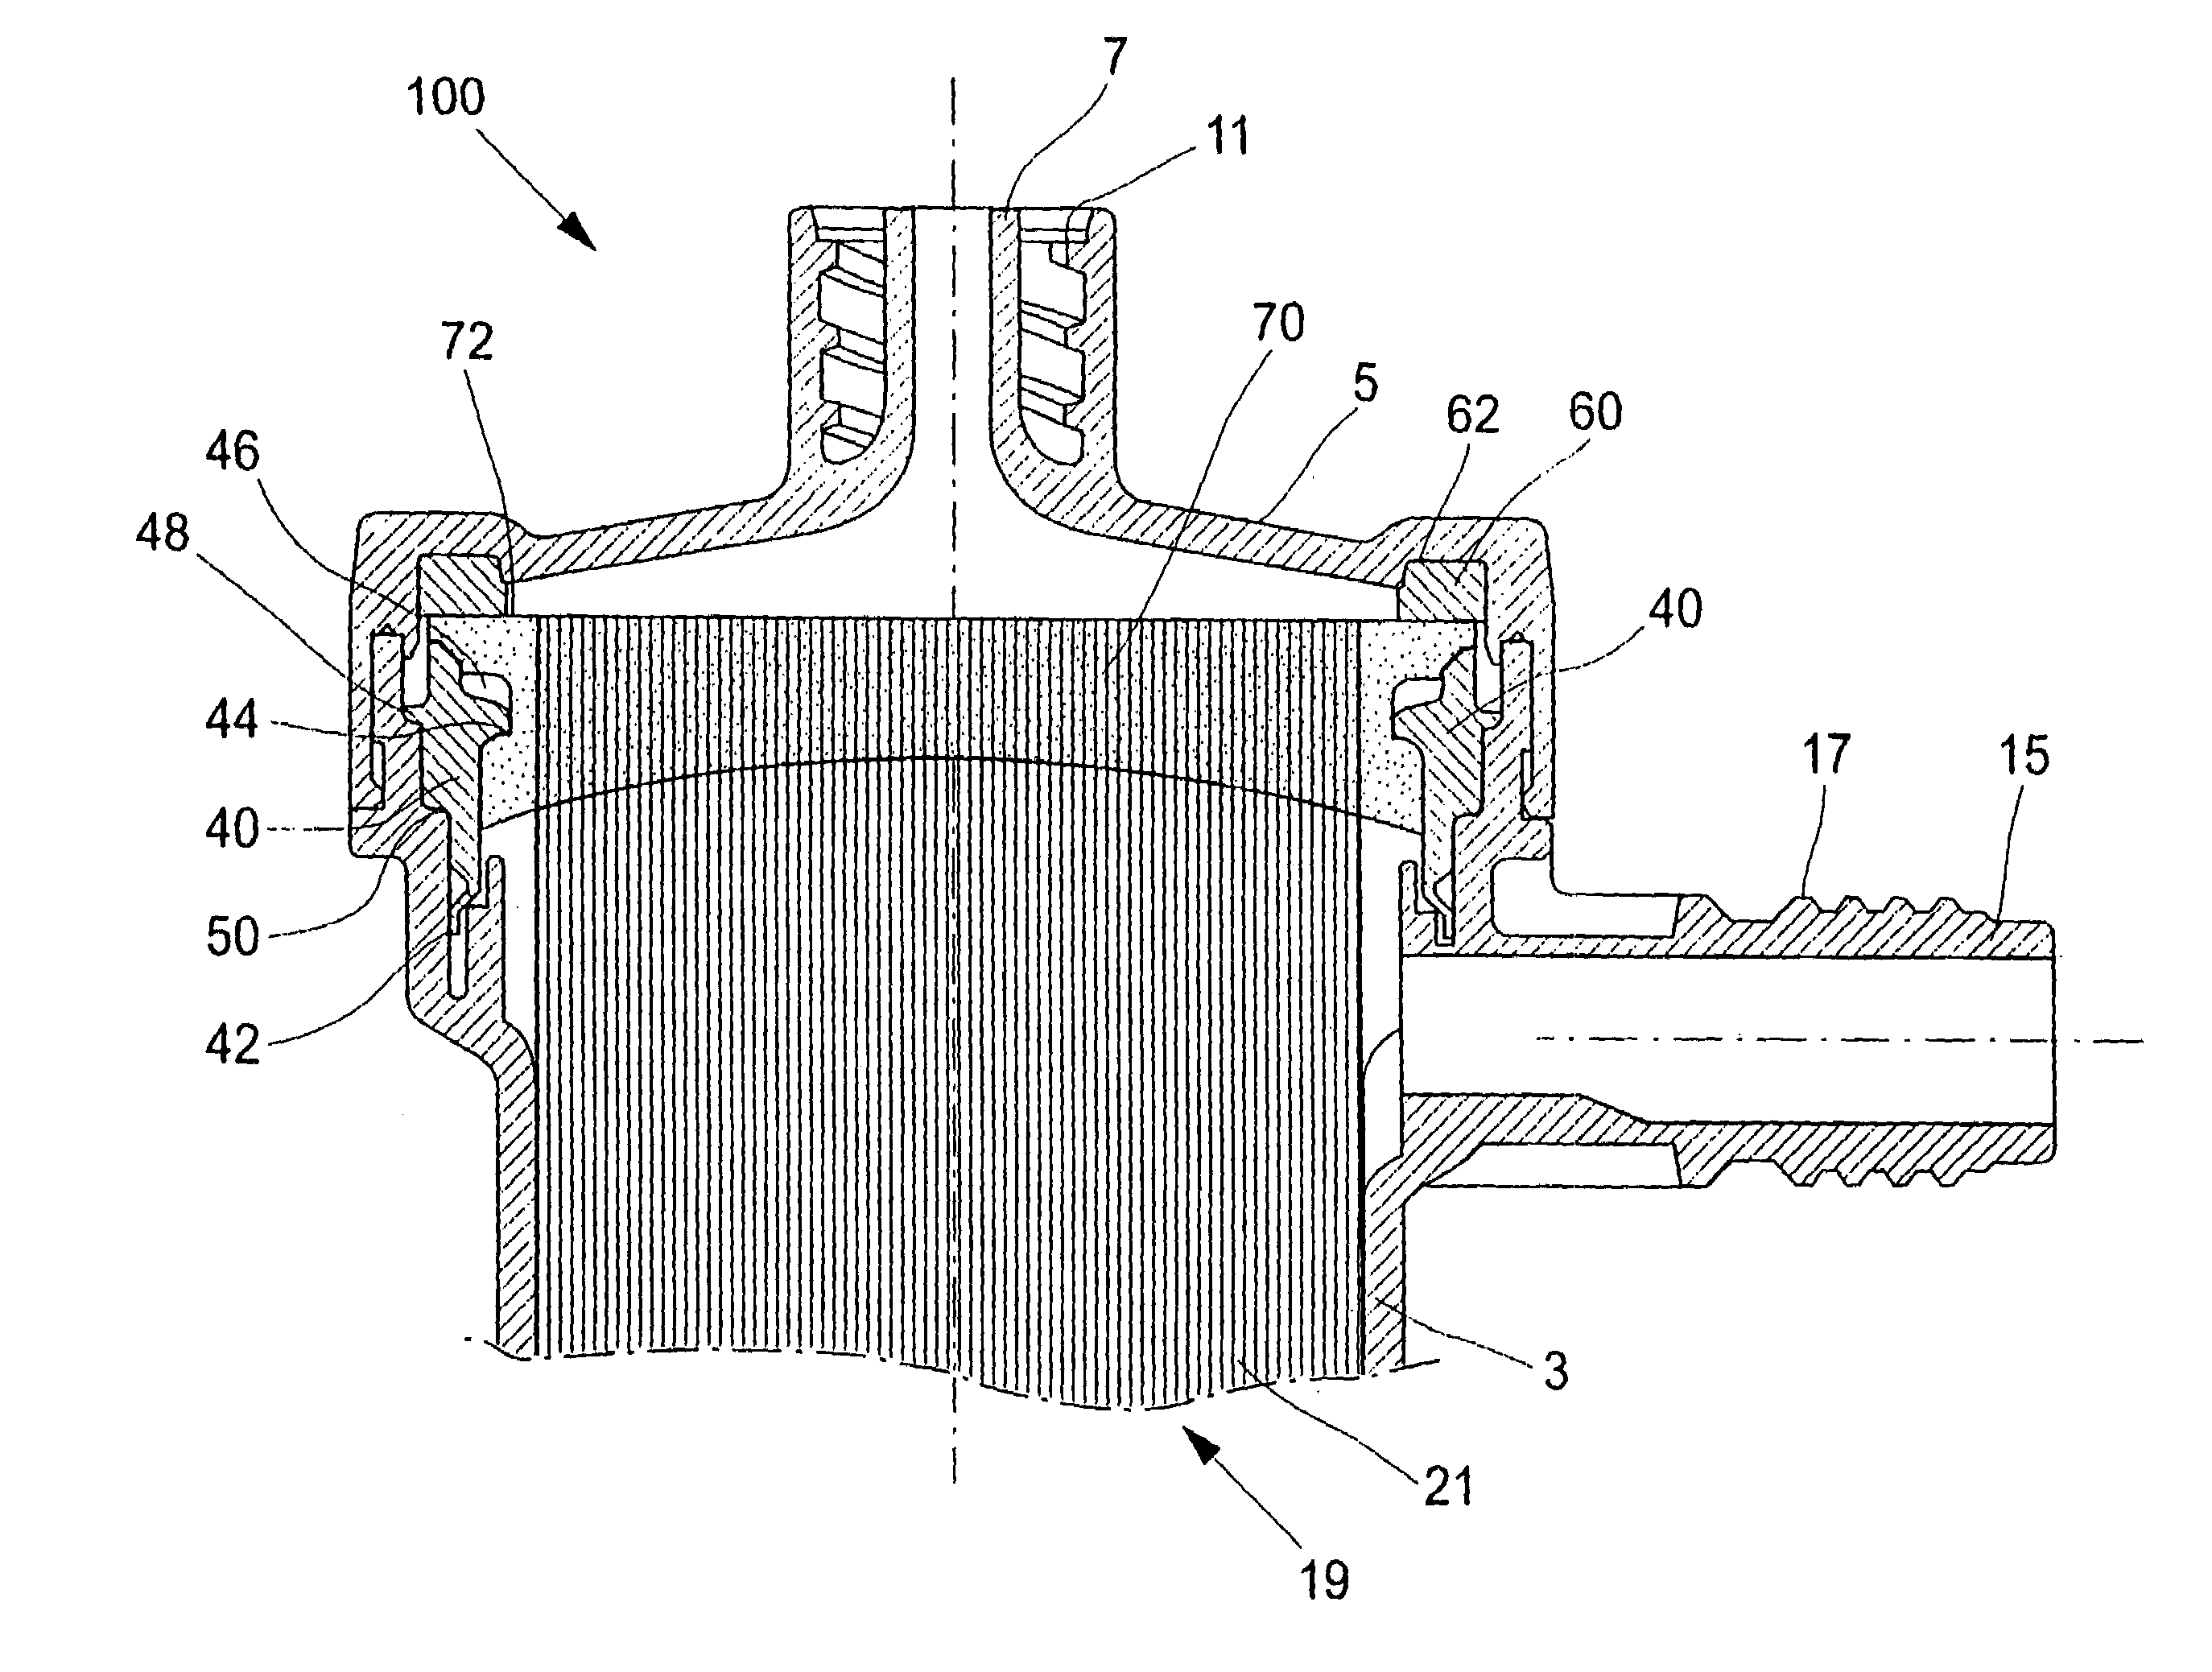 Filter comprising membranes made of hollow fibers